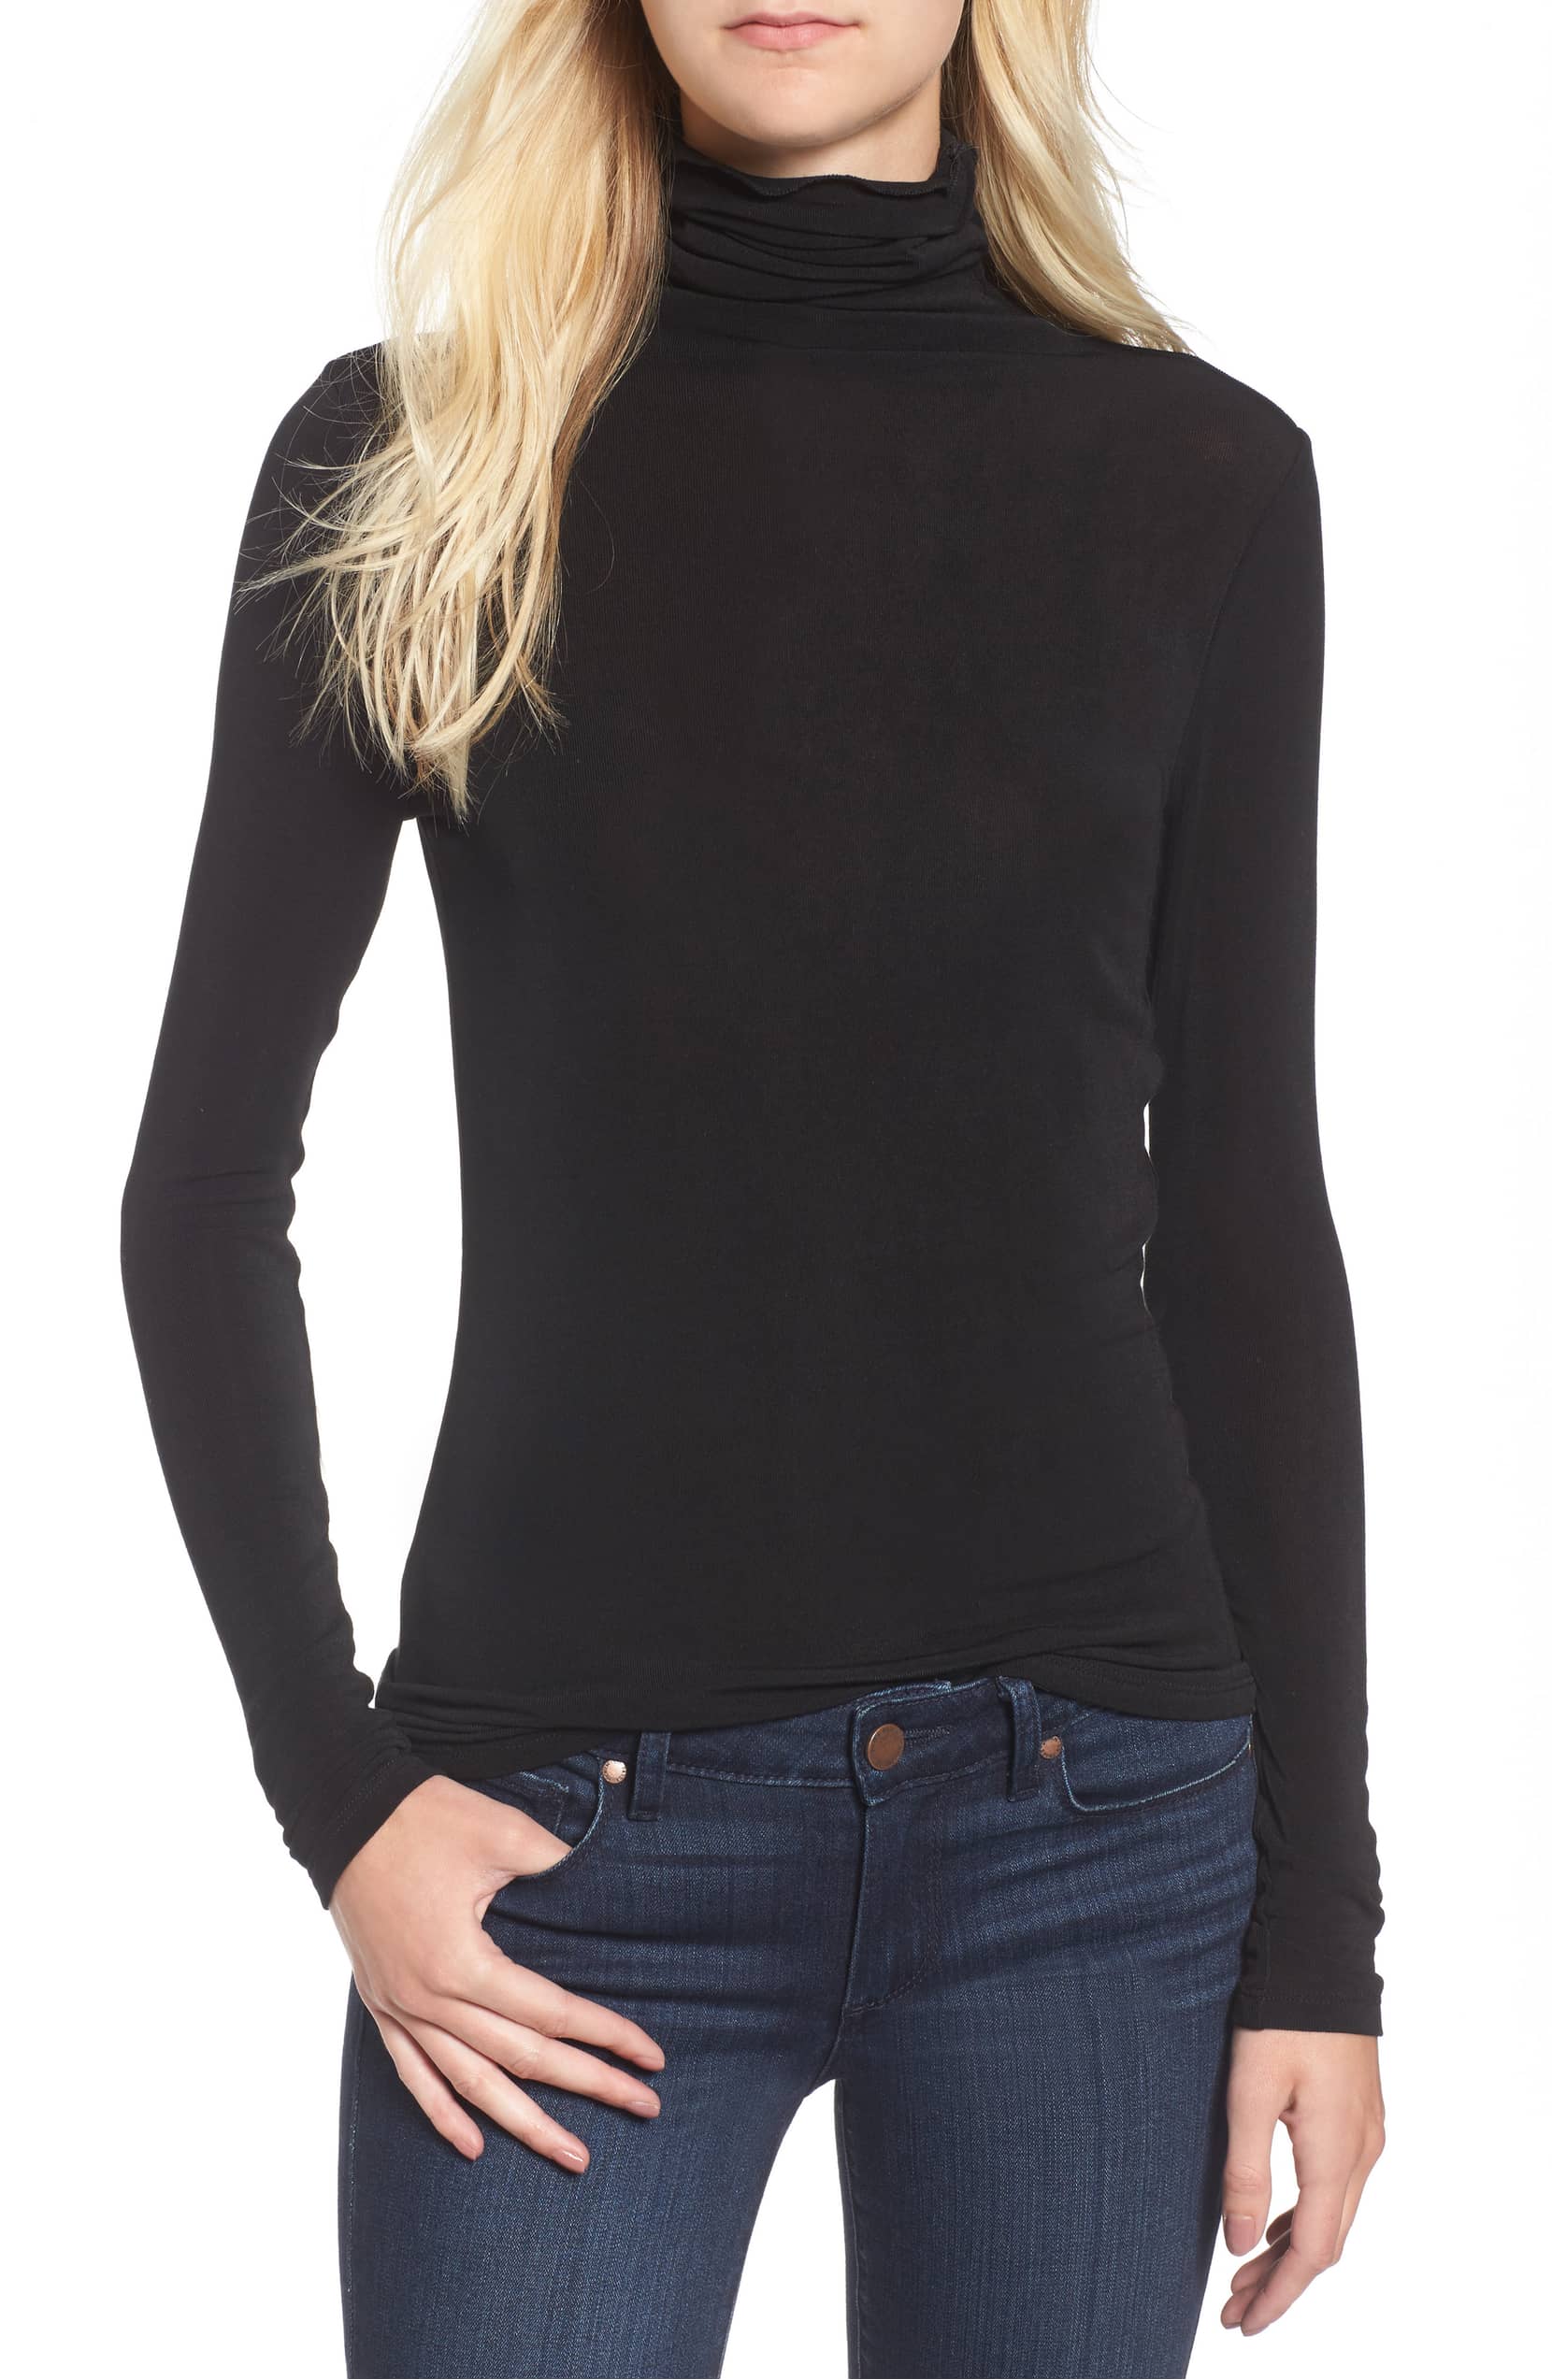 Layer Your Looks This Fall With This Turtleneck From Nordstrom